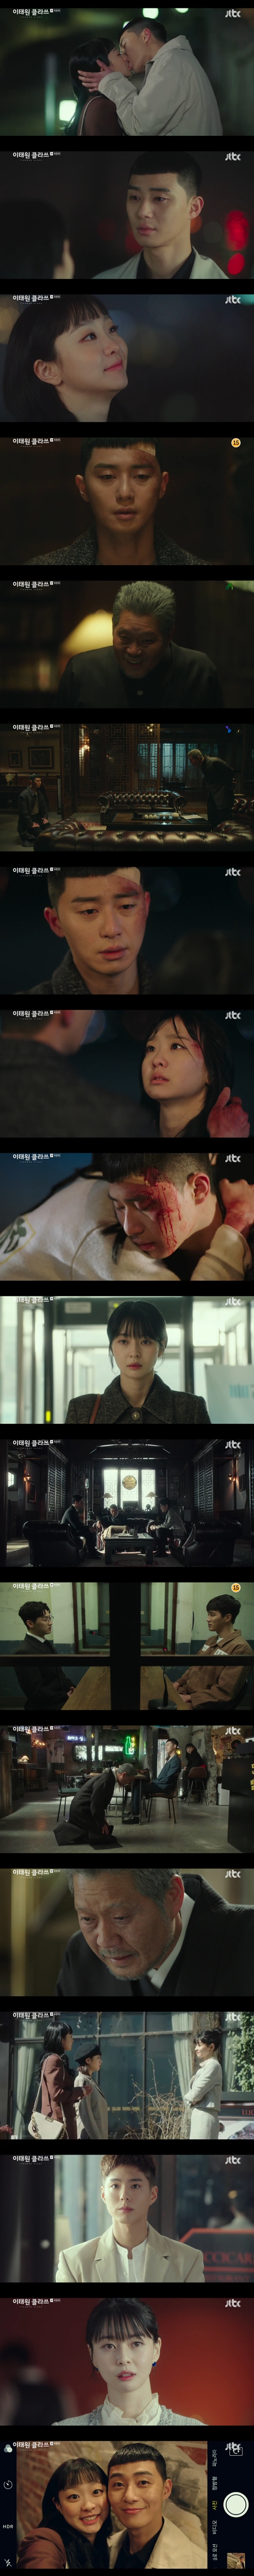 <p>On the night of 21 JTBC gold store drama, Itaewon then write(Theatre default dimmer with directing Kim Sung-Yoon) the last meeting was broadcast was.</p><p>Waking up NIGHT BIRDs(Park Seo-joon)is from(Kim style)for a sick body caused. Long-Hee(Yoo Jae name)devices source(security)is caught and this tells the location of that requested and, night new that without hesitation to his knees.</p><p>Zhang Ye smile the moment, Night new mouth opened. He said, now for revenge, as the area came alive. Long shall that man my life hell, driving time, the enemies at the same time, a great man. I Your Back to chase life over him. Until now, this fight is worth it all. Such a man is a hostage in the knees as well this ugly old man to catch up to the time that I was inviting. Ten years from now you know you didday to day him.</p><p>Tighten in a crisis, falls in the moment, in front of it night new, and the best lift ticket(kind of water)appeared. Night new, and the best lift ticket Jang Geun Park, Kim Hee Hoon(original expression level)and fought and eventually joy in your success. Night New, screwed in love confessed.</p><p>This old dog(the right one)of the bit width as the device is collapsed said. Night new of the IC Group is collapsed the device is acquired in order to moved, and this example is long, we Night into the fortress to find him. Night New, made sundubu jjigae eat is back, a sincere apology to me. Wrong was I,said he to the kneeling pole us.</p><p>But Dr. new is the My Needs do you see? That shopkeeper is. Acquisitions in the lost and I am behind that and what is it worth it? The business now. Presidentand accepted his. So the night into the fortress of the IC device is to be acquired.</p><p>Night new this towards the Mind information about the sewage to find a restaurant with a new life began. Handsome chef(Park Bo-gum)also joined. The best lift ticket and Express(a)of the thumb and present was.</p><p>The Itaewon streets as a background to enjoy Dating night new, the Joey in the guise of a drama with that put.</p><p>Itaewon then writingis irrational World night New This(Park Seo-joon), including the youth of the heapfor the rebellion through invigorating and exhilarating catharsis to the viewers of Love came to accept. Park Seo-joon, Kim-style, the right one, keep the current name, Kim Dong-hee, security-Hyun, Kim Hye-Eun, Ryu Management, a such as actors of the open nature Itaewon then write syndrome to lead him.</p><p>As a follow up to the actor Kim Hee-love, persecution standard as he is JTBCs new Morning drama, couples worldis coming on the 27th, the first broadcast.</p>